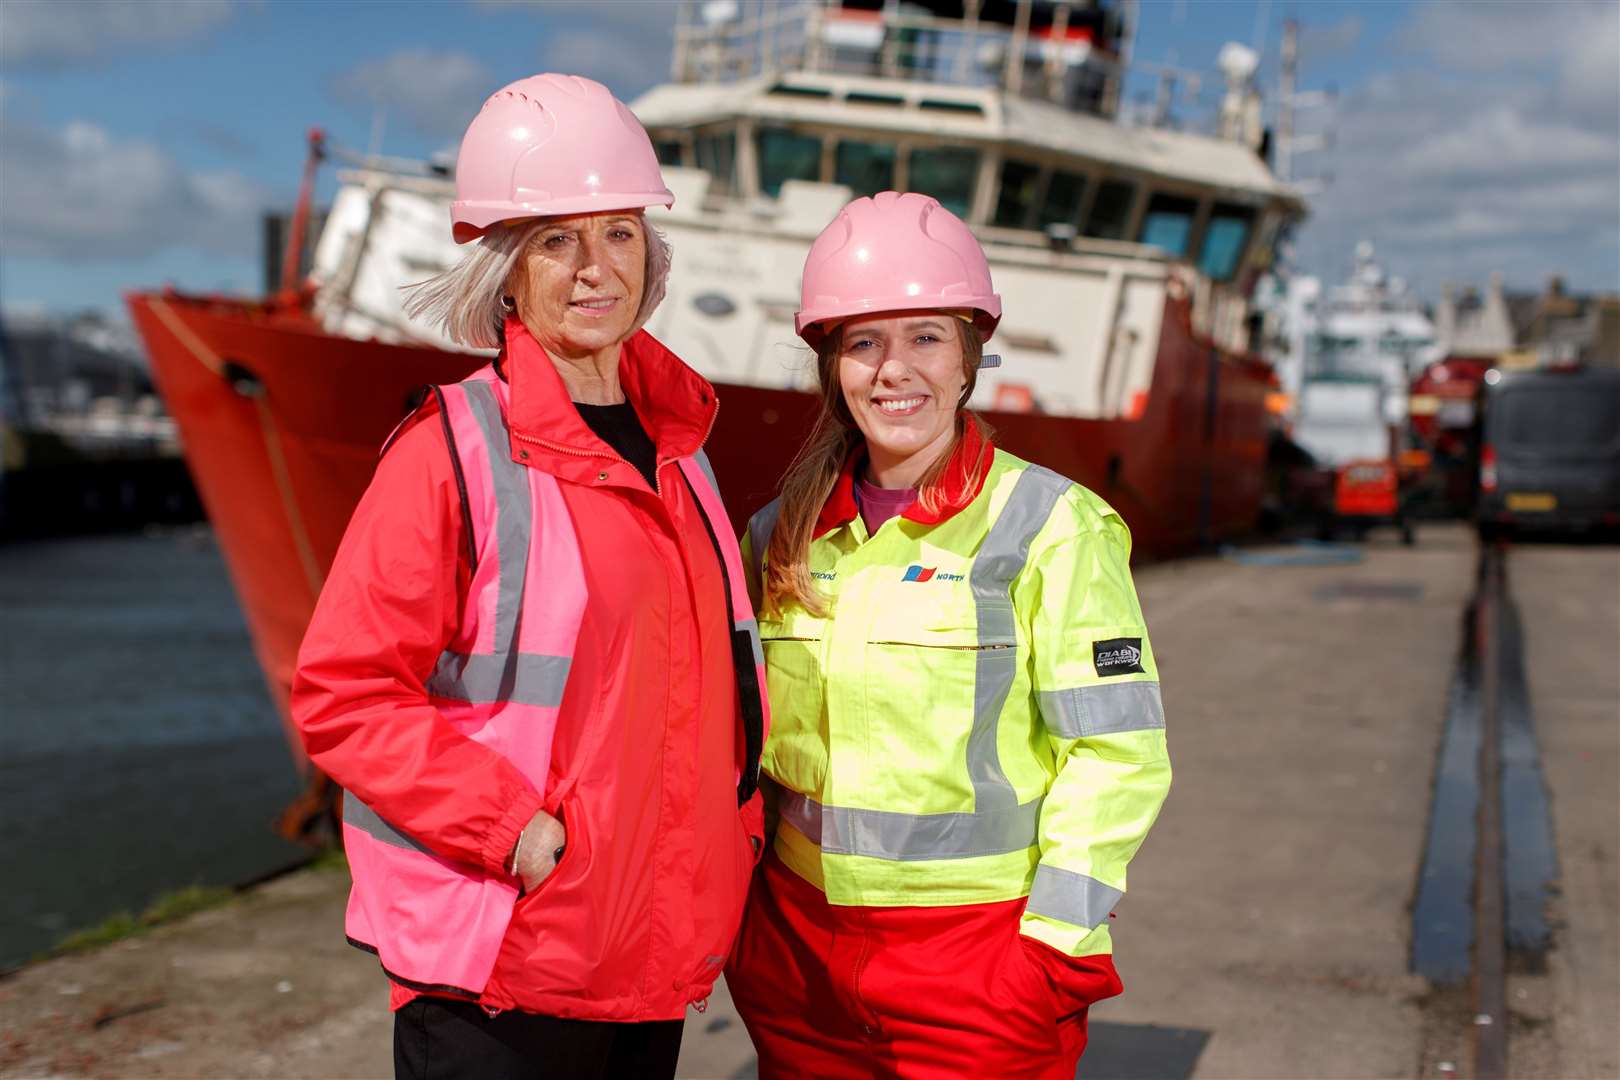 Anne Mears and Victoria Diamond onboard the vessel the Grampian Conqueror. Photo by Ross Johnston/Newsline Media